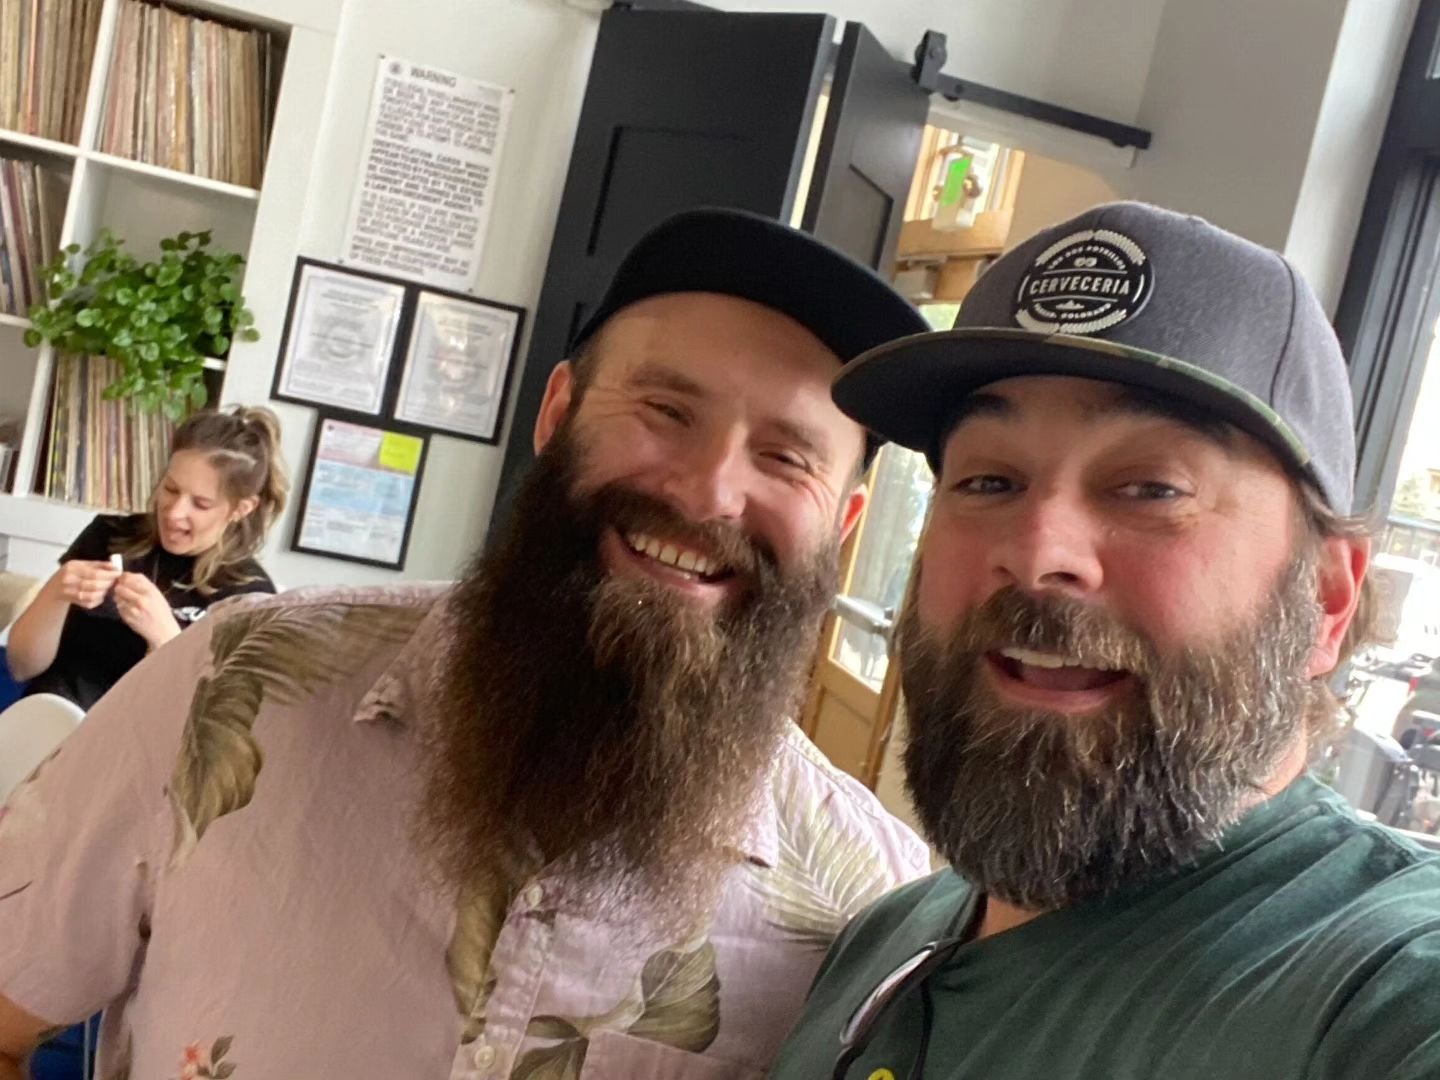 🎉🍻 @milieufermentation is officially open for biz TODAY! 🍻🎉

📍Located in the Anschutz Medical Campus, and pronounced 'mil-you', our pals Rob and Andrew have created a space that... represents the place, time, and circumstances in which our socia